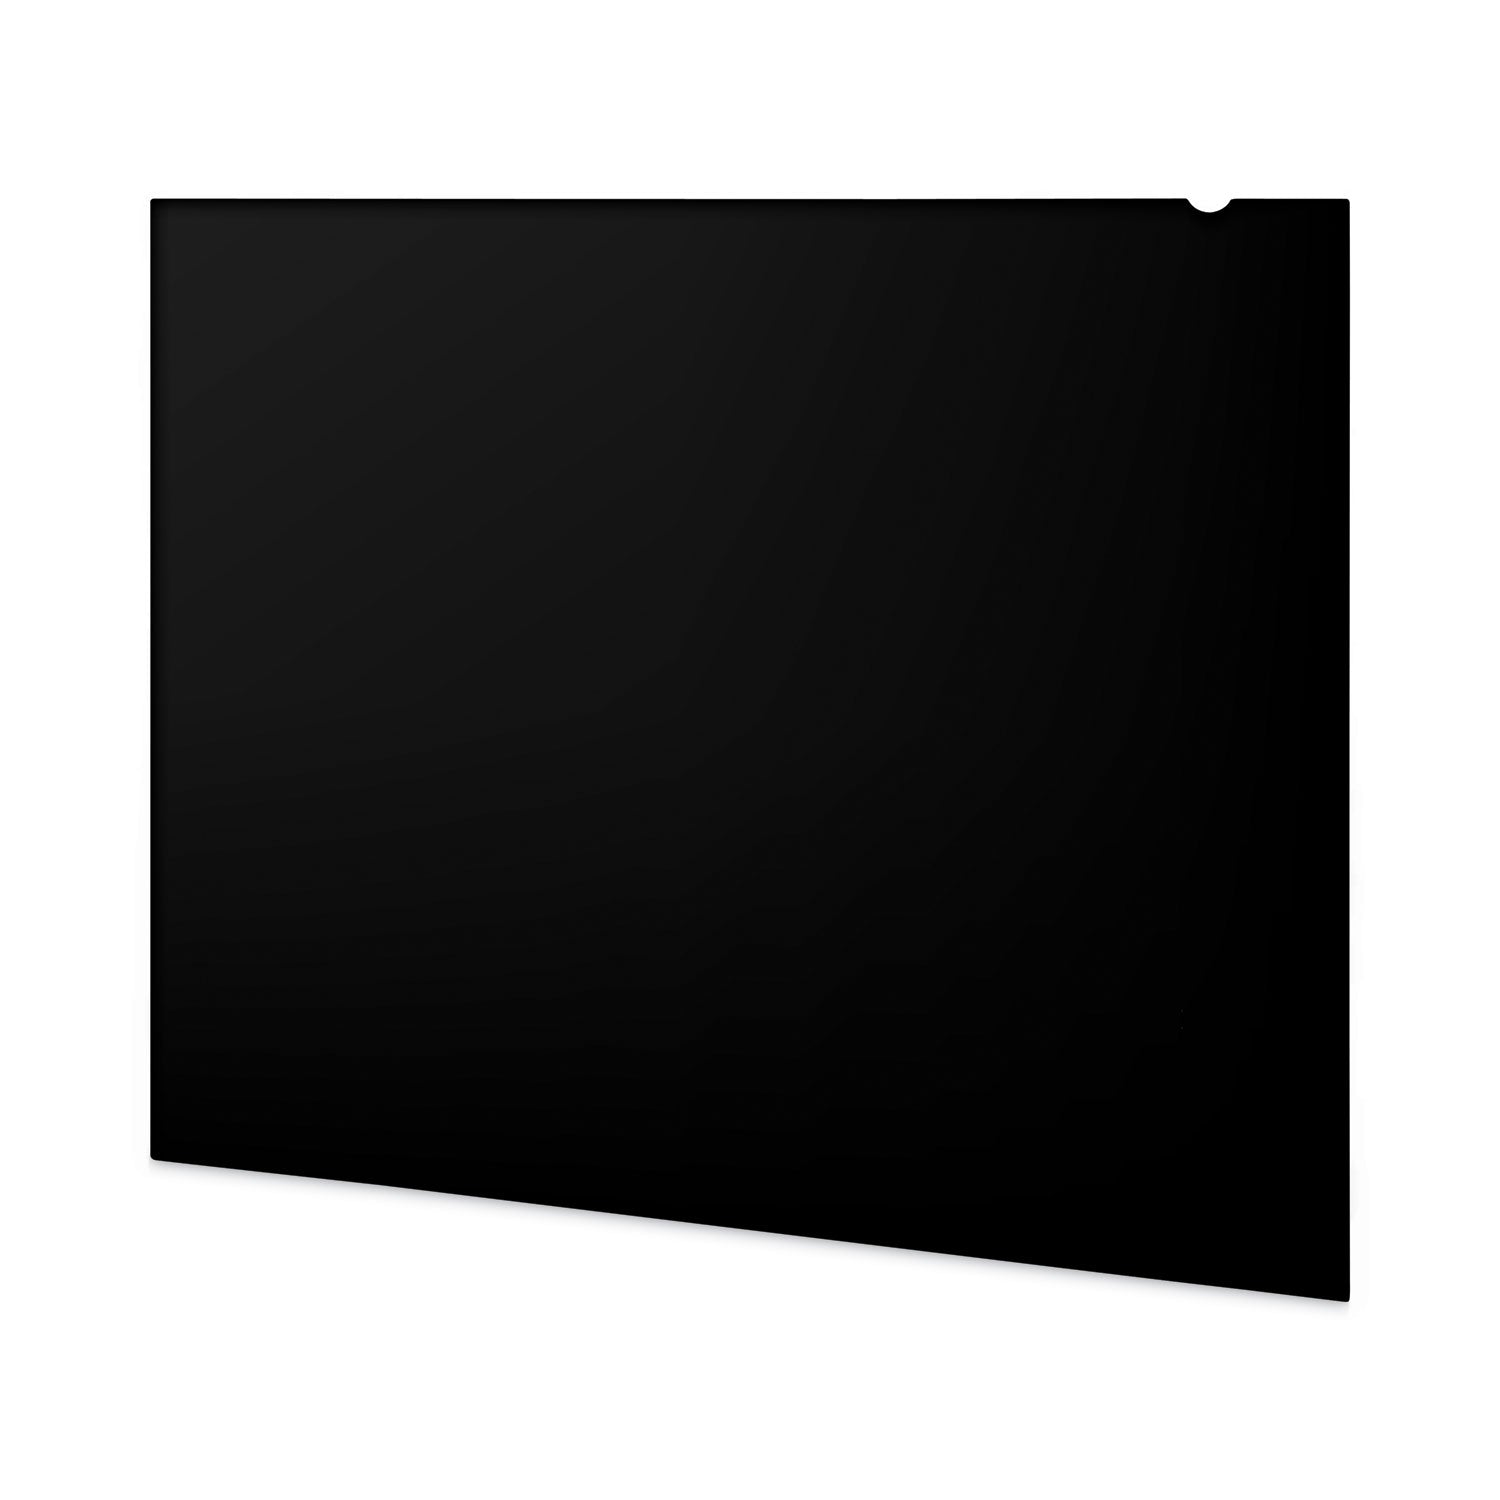 blackout-privacy-filter-for-27-widescreen-flat-panel-monitor-169-aspect-ratio_ivrblf27w - 1